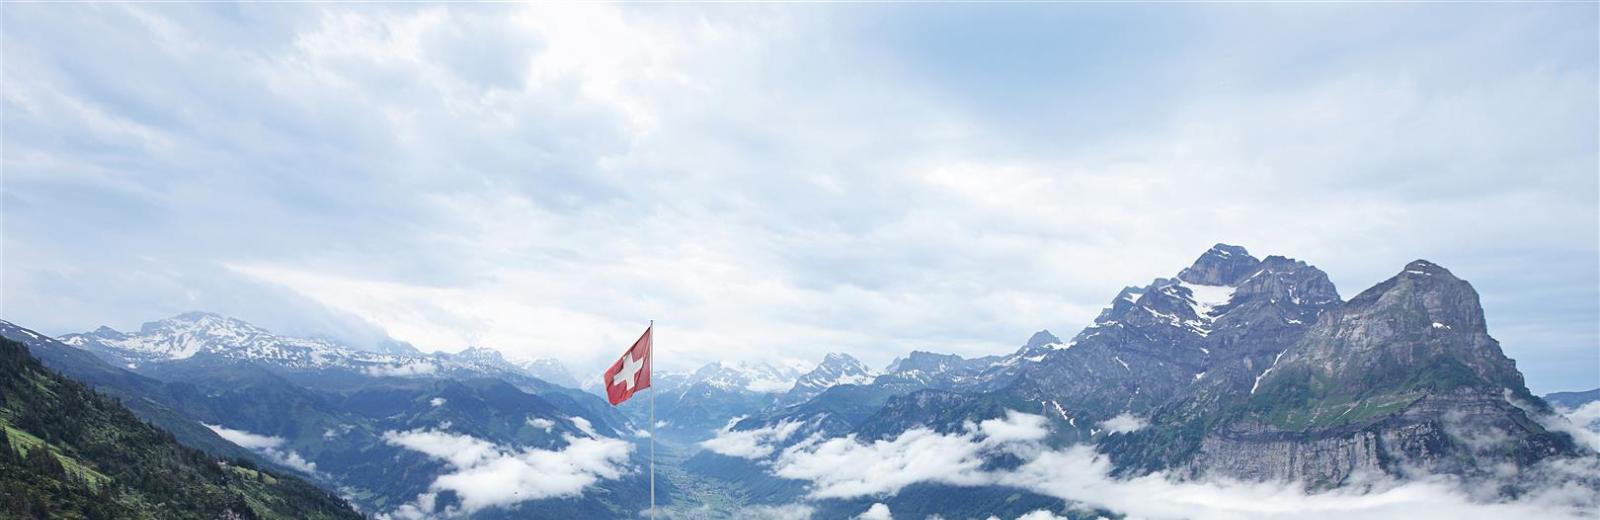 The Swiss flag – a plus for the country